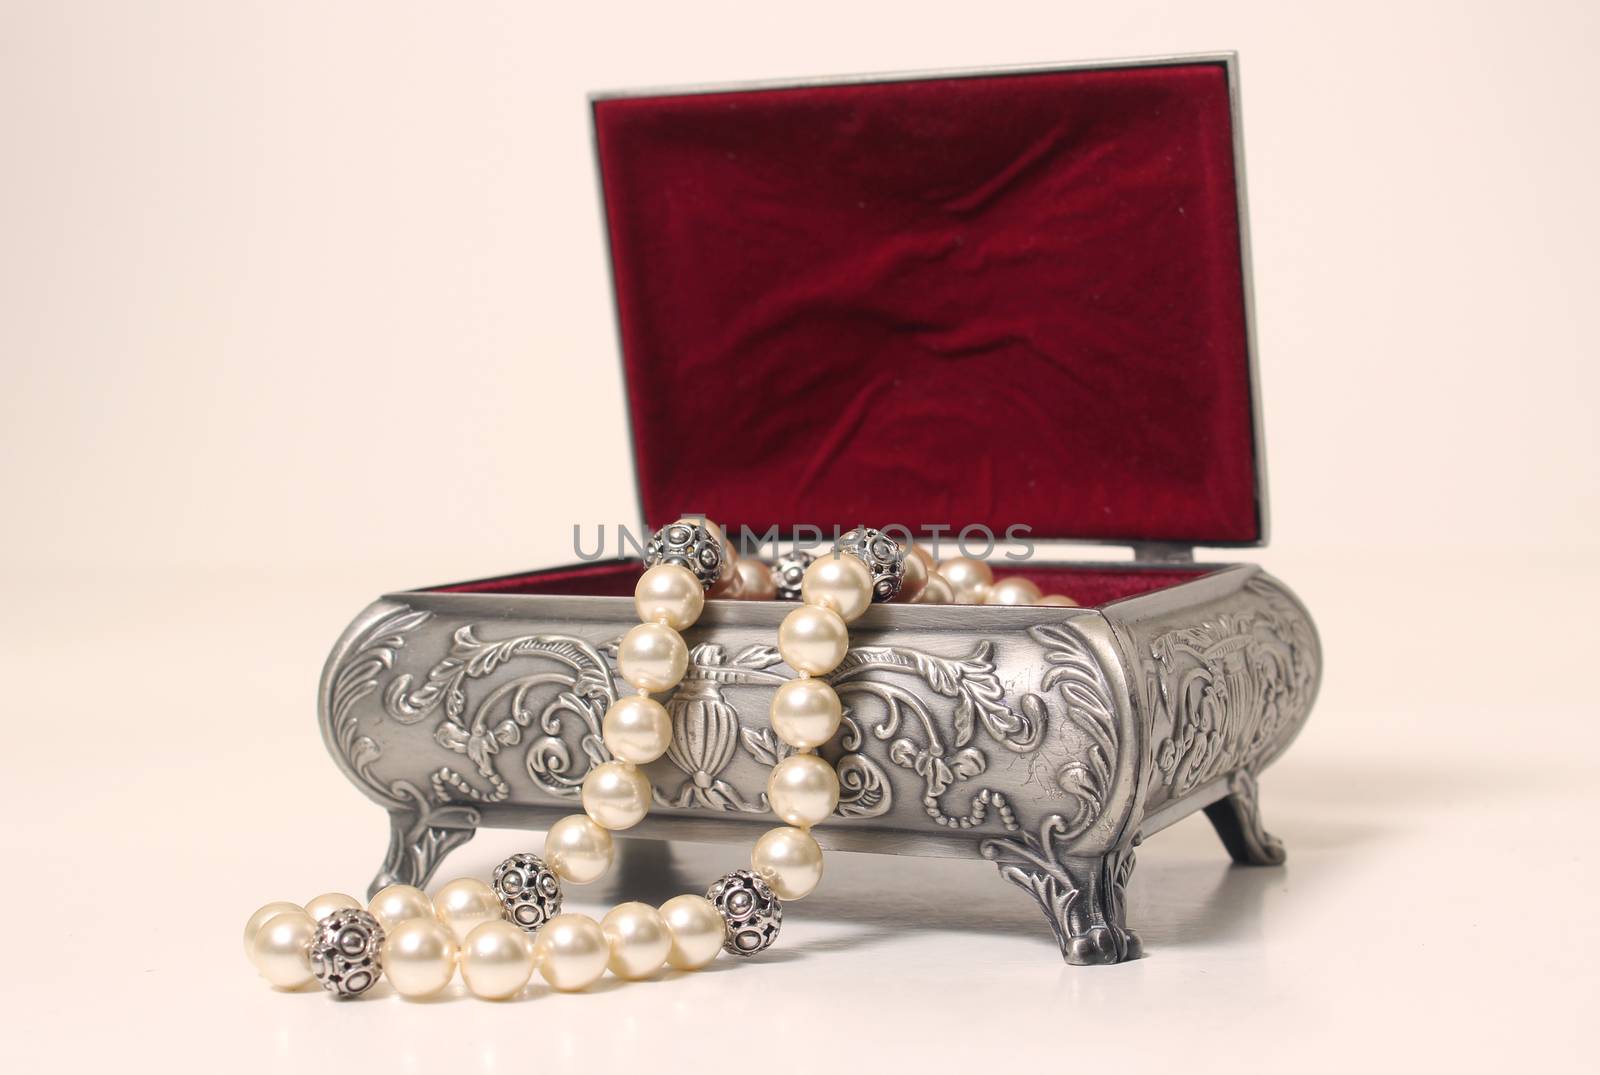 Jewelry Box With Pearl Necklace on light colored background